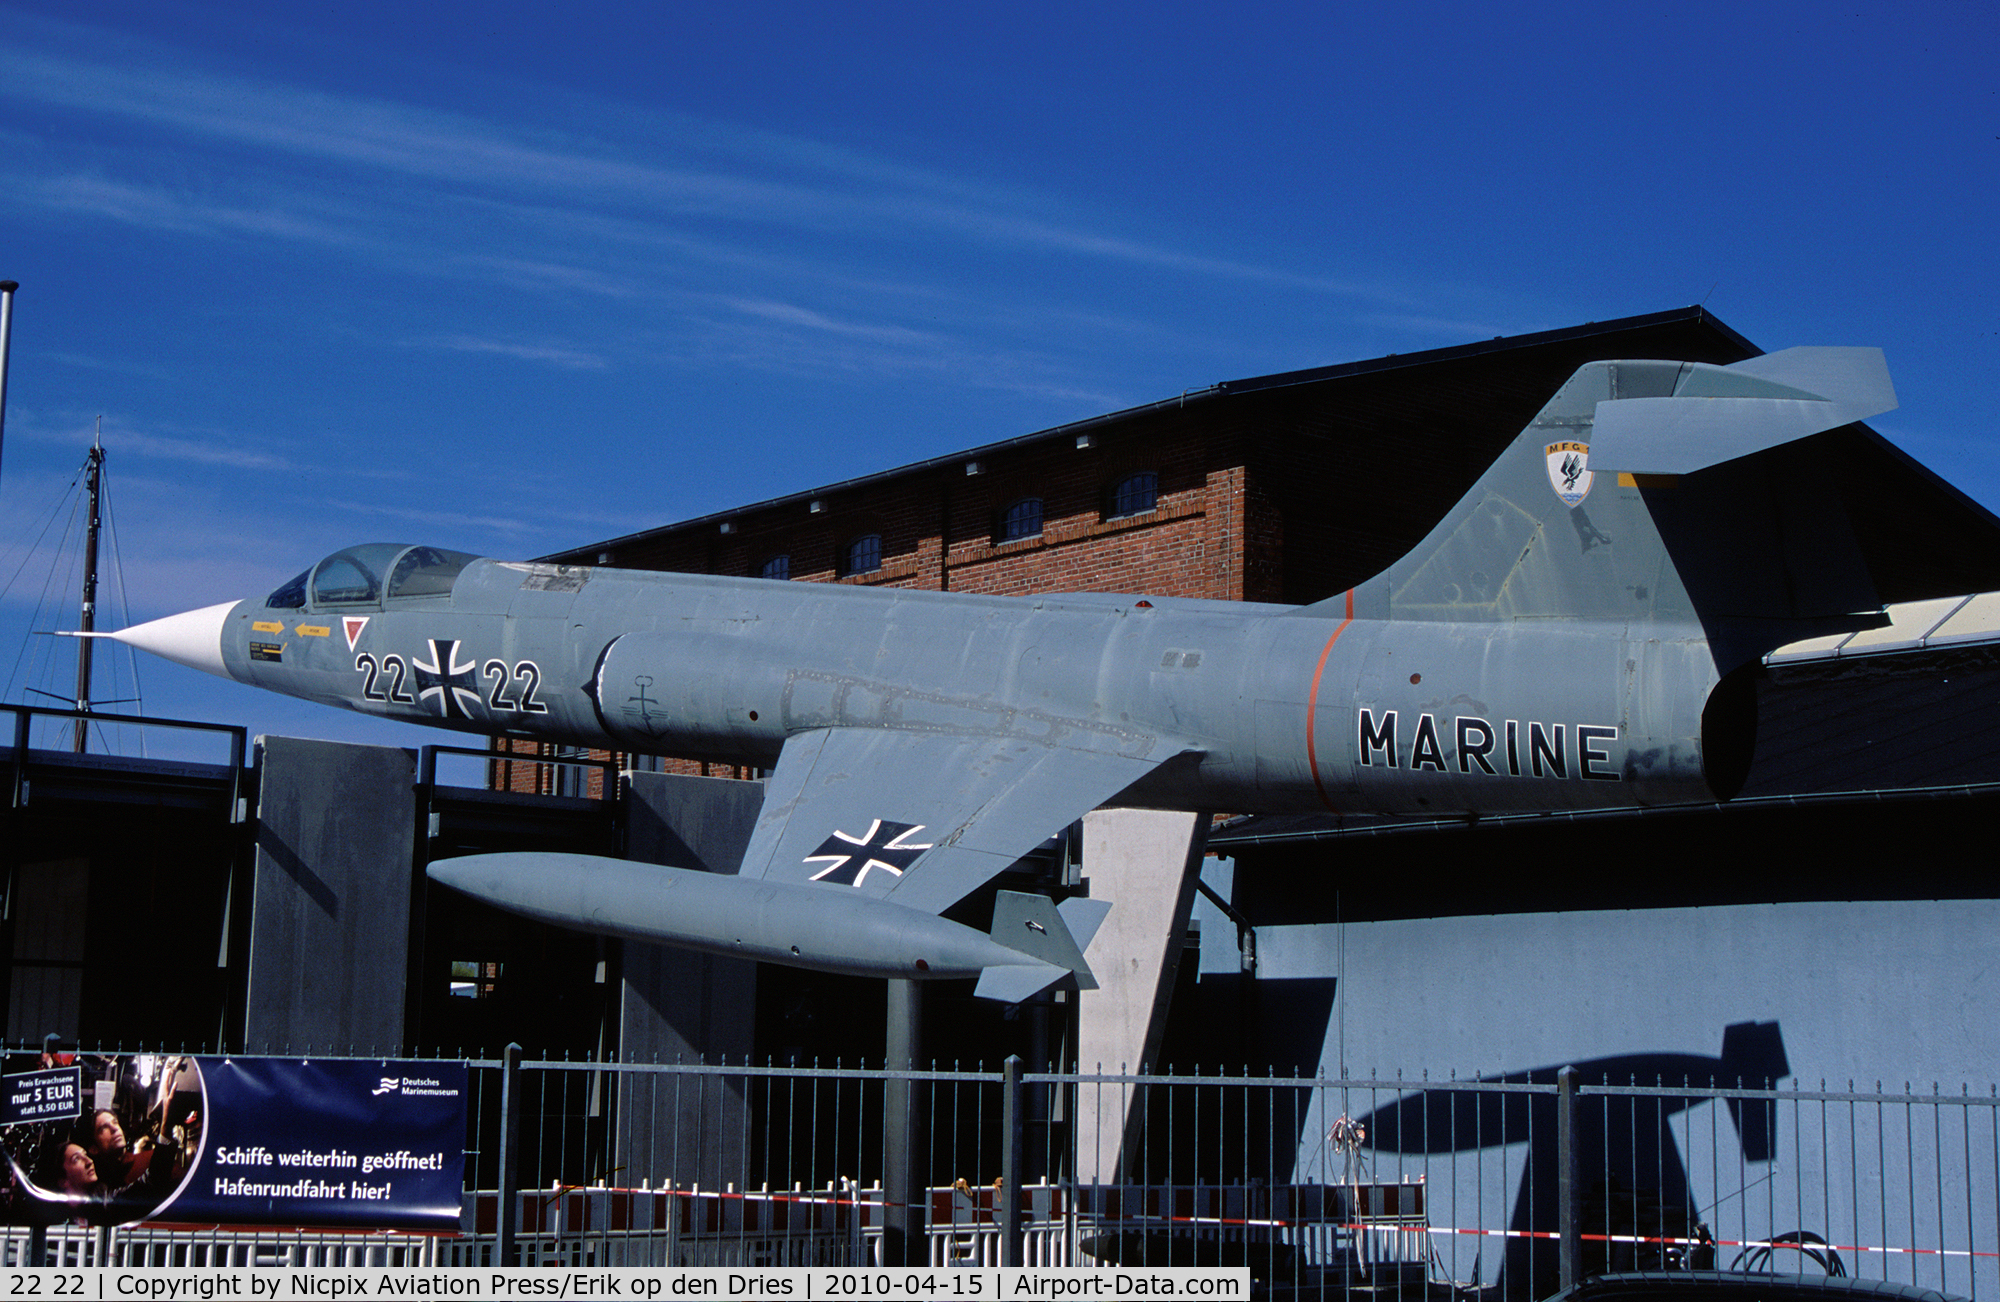 22 22, Lockheed F-104G Starfighter C/N 683-9035, F-104G 2222 is preserved at the Naval Museum in Wilhelmshaven, Germany. Its' correct registration is 2574.